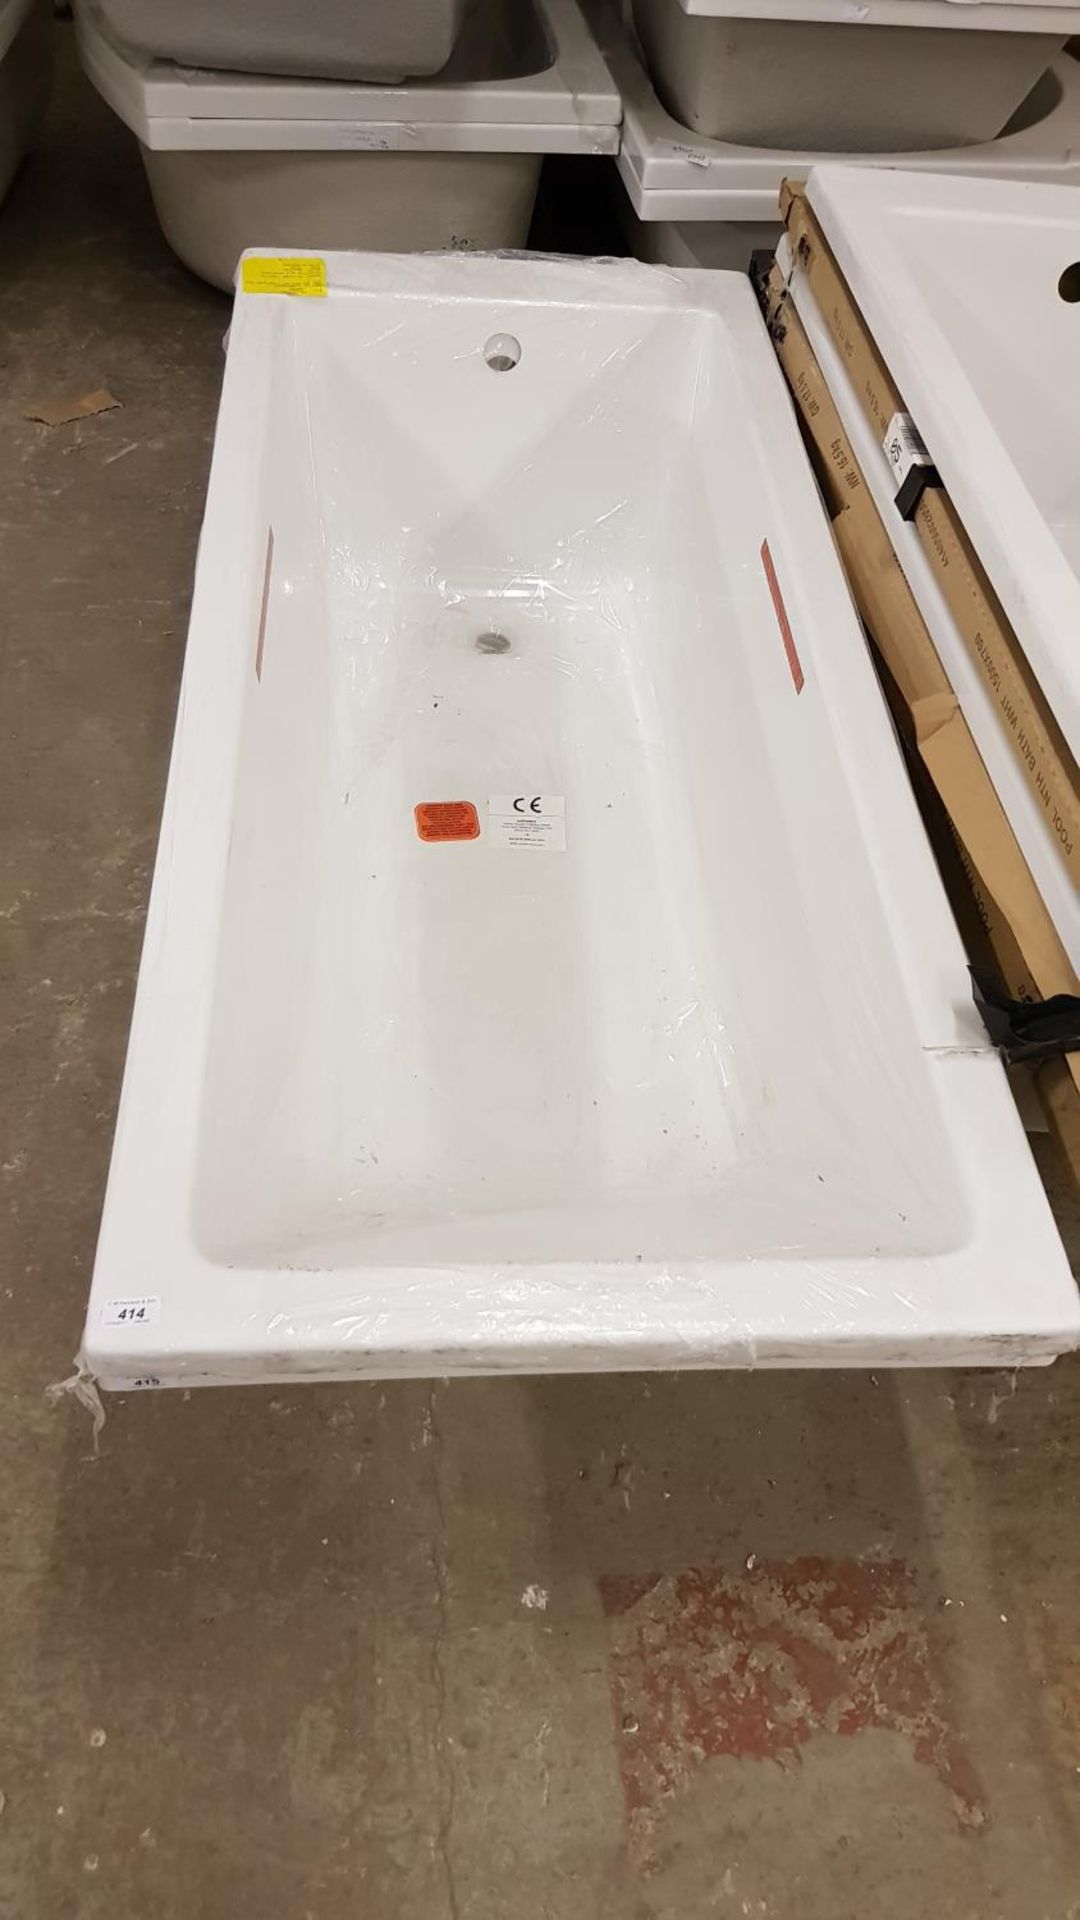 1600x700 single ended square bath - Image 2 of 2